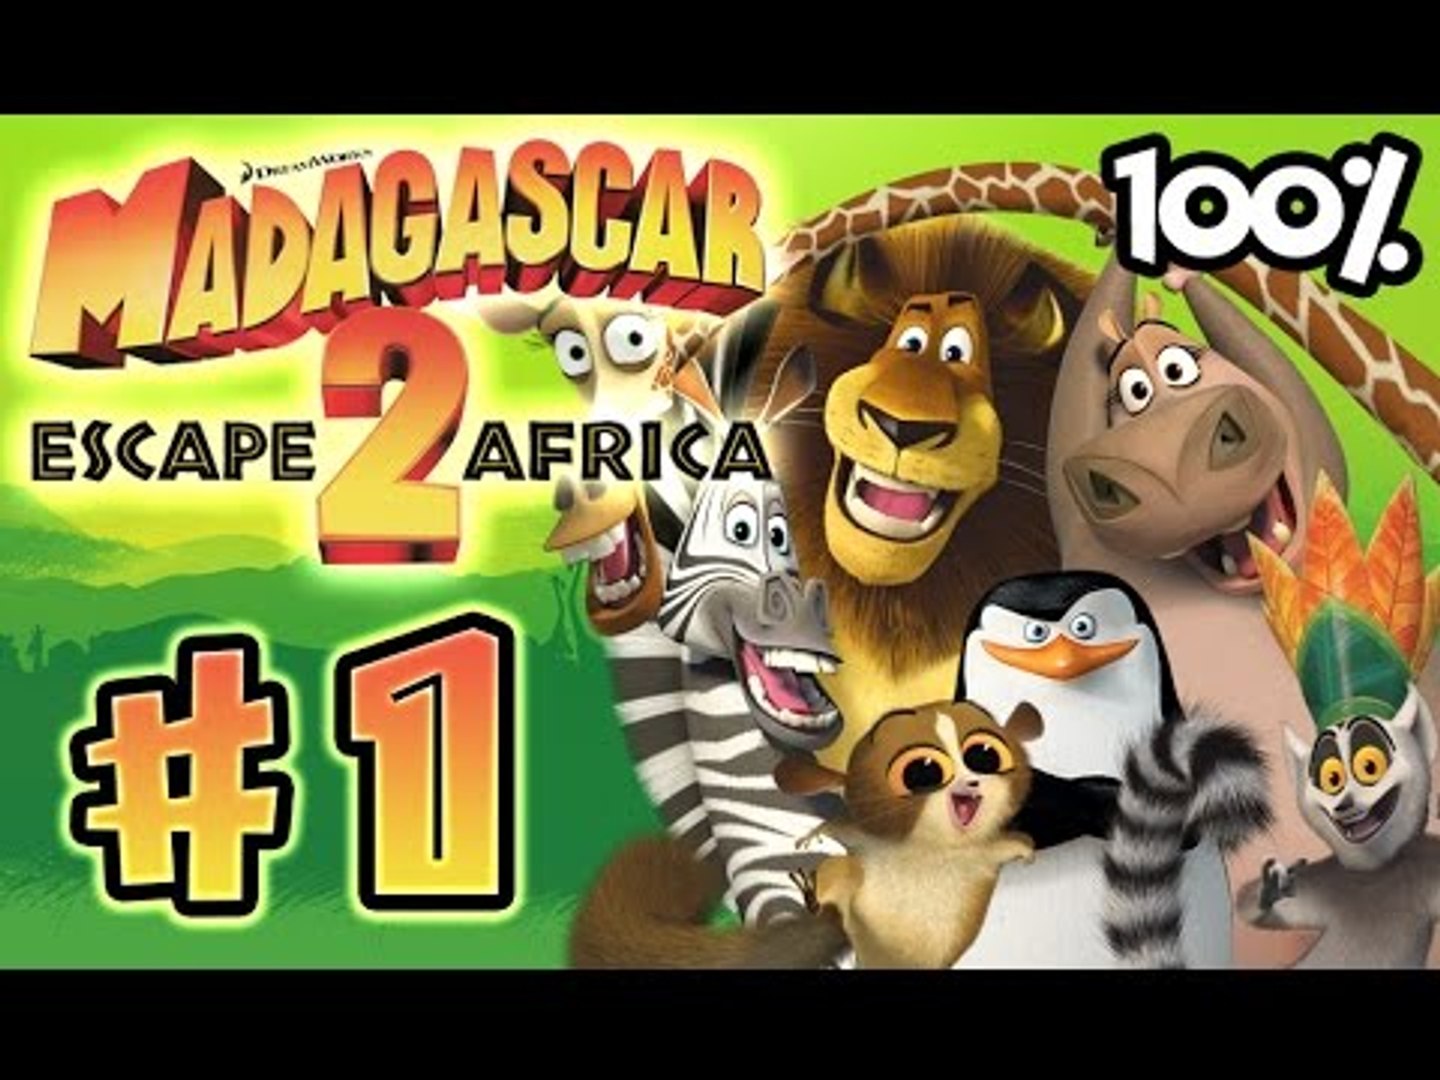 Madagascar Escape 2 Africa Walkthrough Part 1 (X360, PS3, PS2, Wii) 100%  Level 1 - In Madagascar - - video Dailymotion